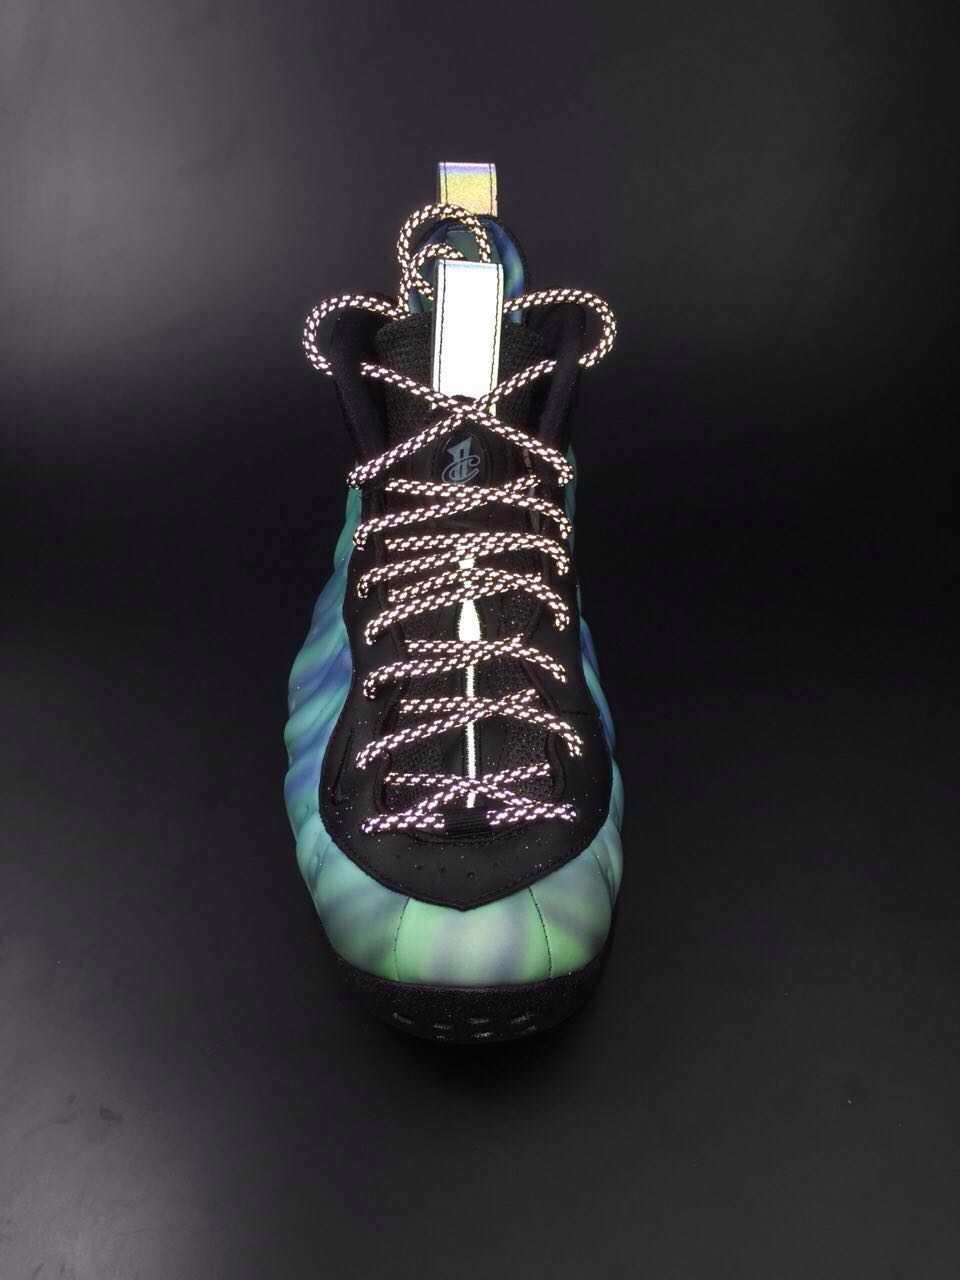 All-Star 2016 Nike Air Foamposite One Northern Lights